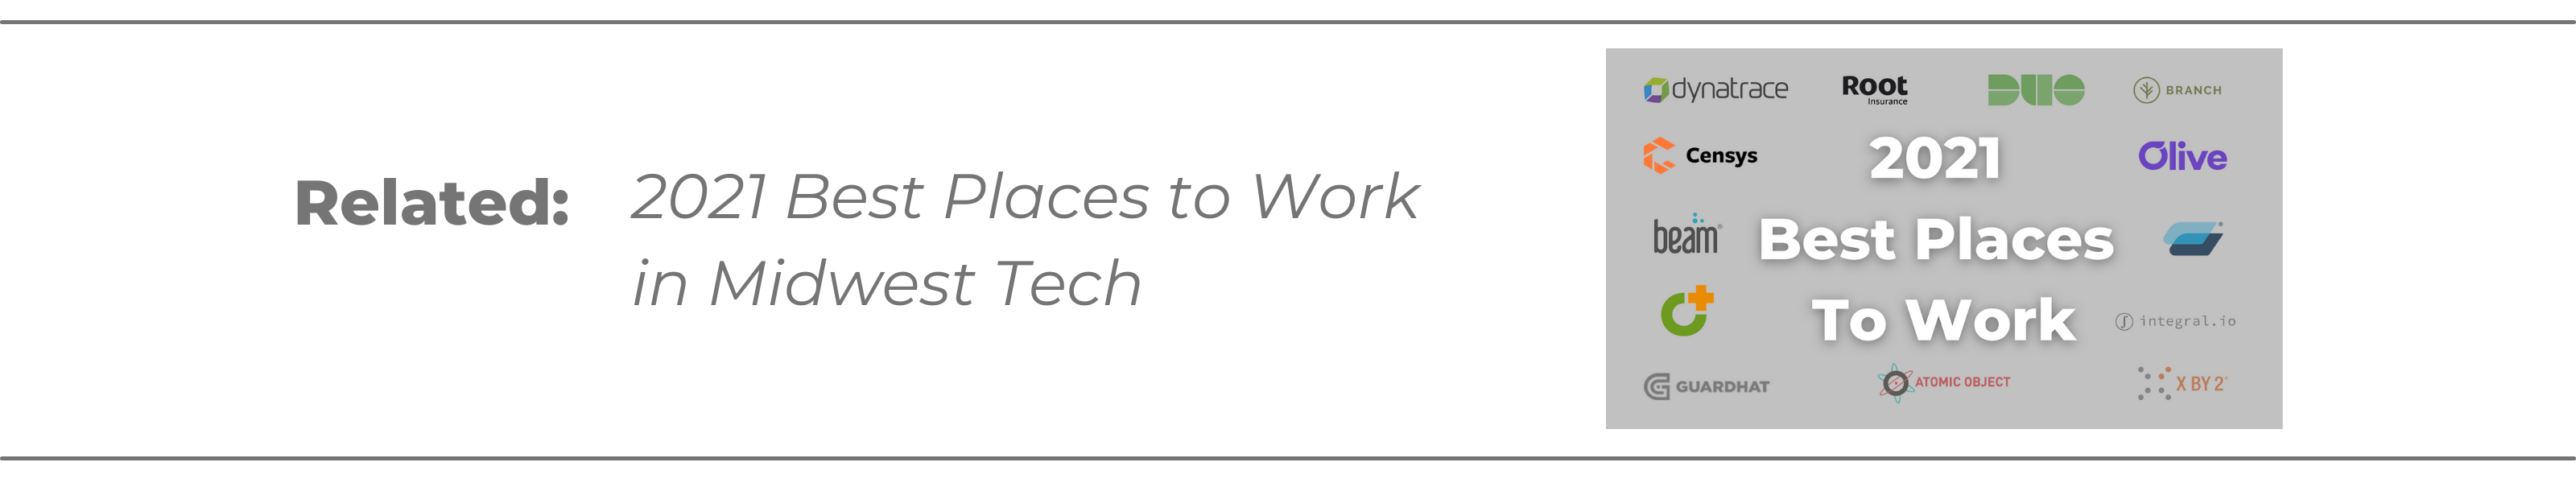 best places to work midwest tech